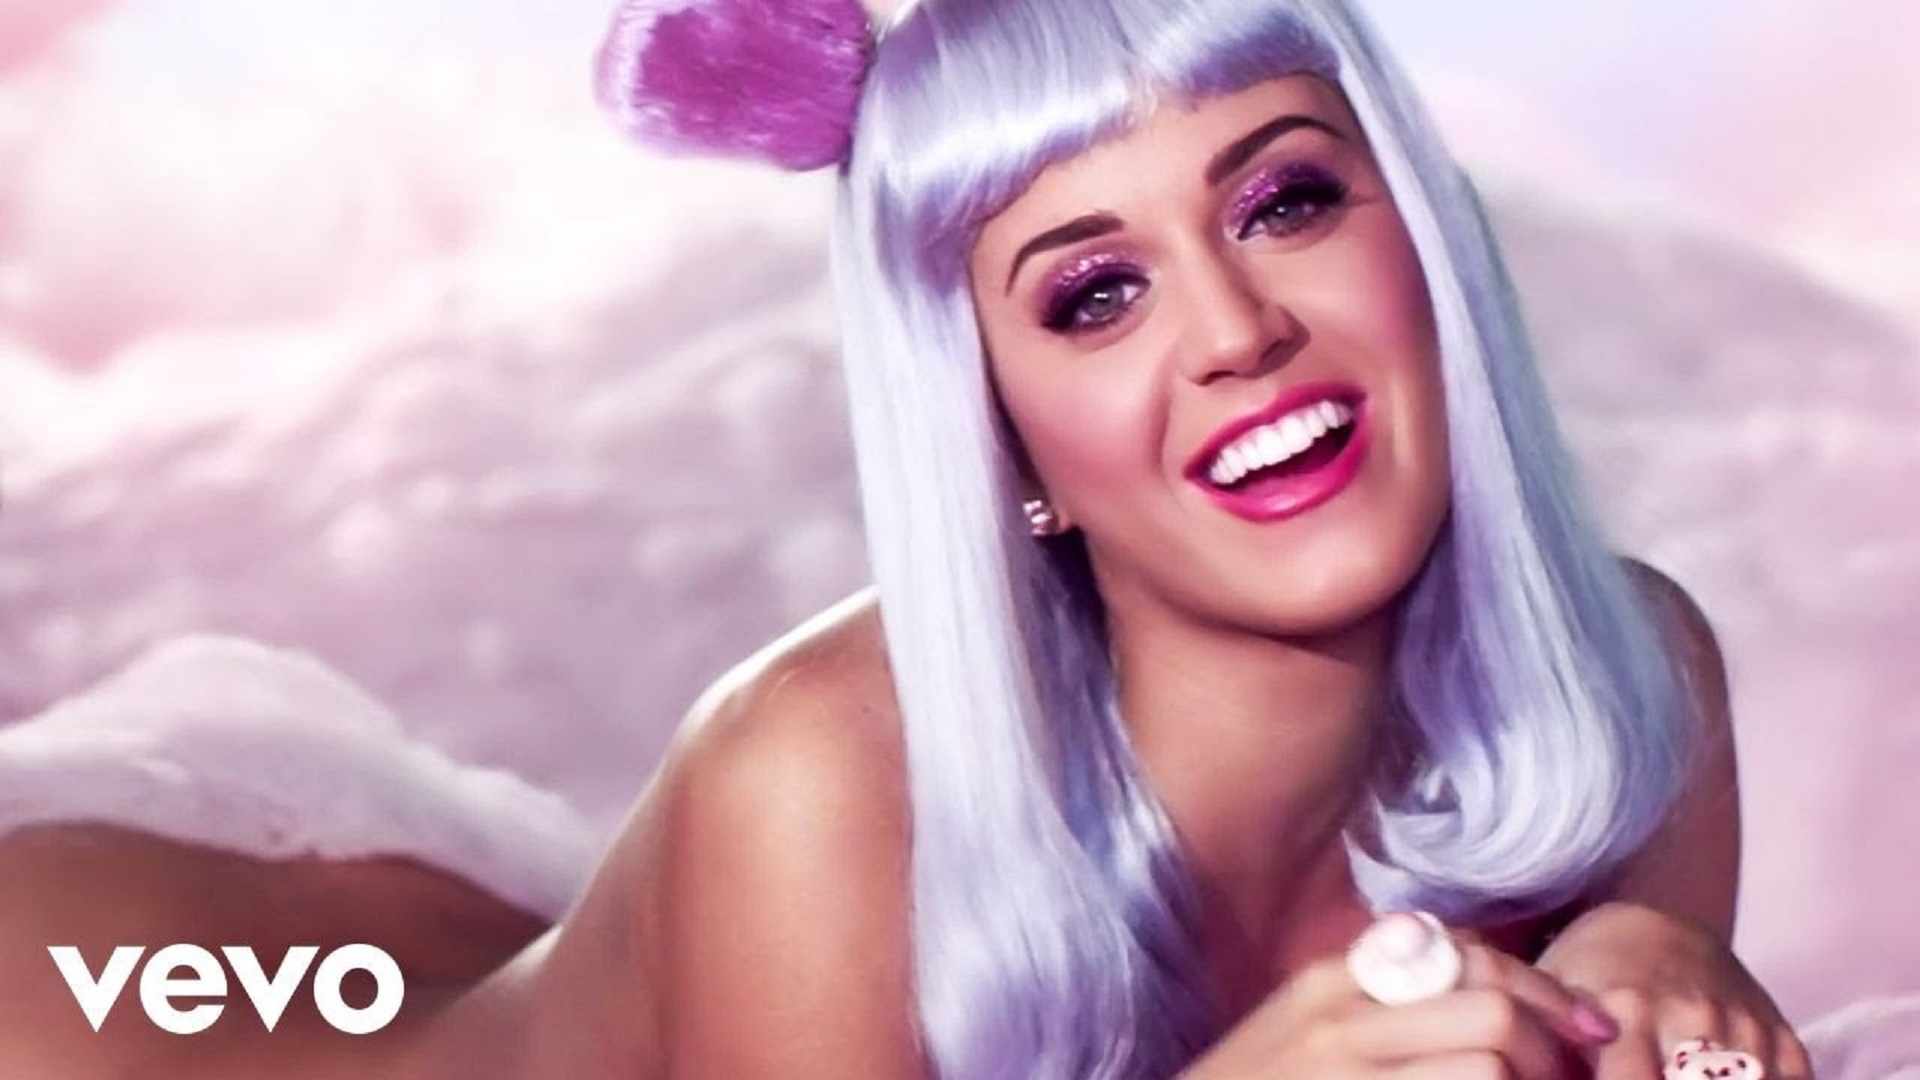 1. Katy Perry's iconic blue hair and candy dress in her "California Gurls" music video - wide 1